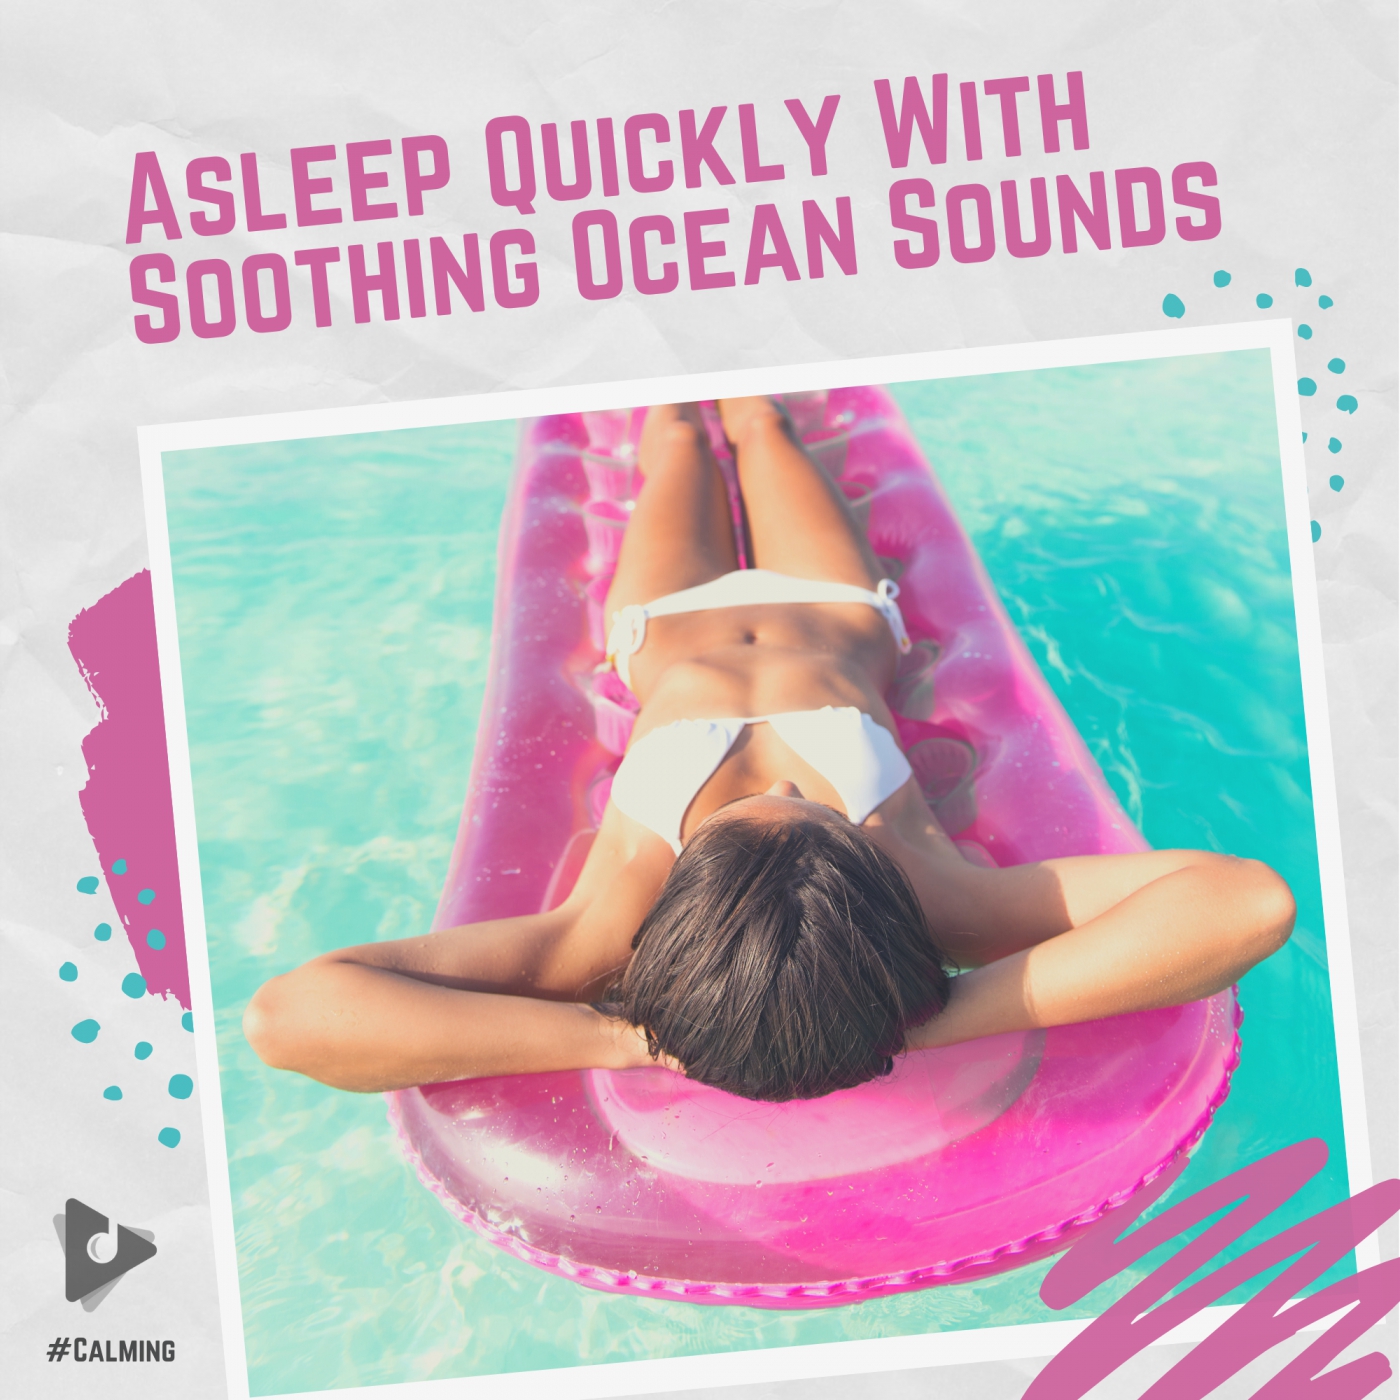 Asleep Quickly With Soothing Ocean Sounds